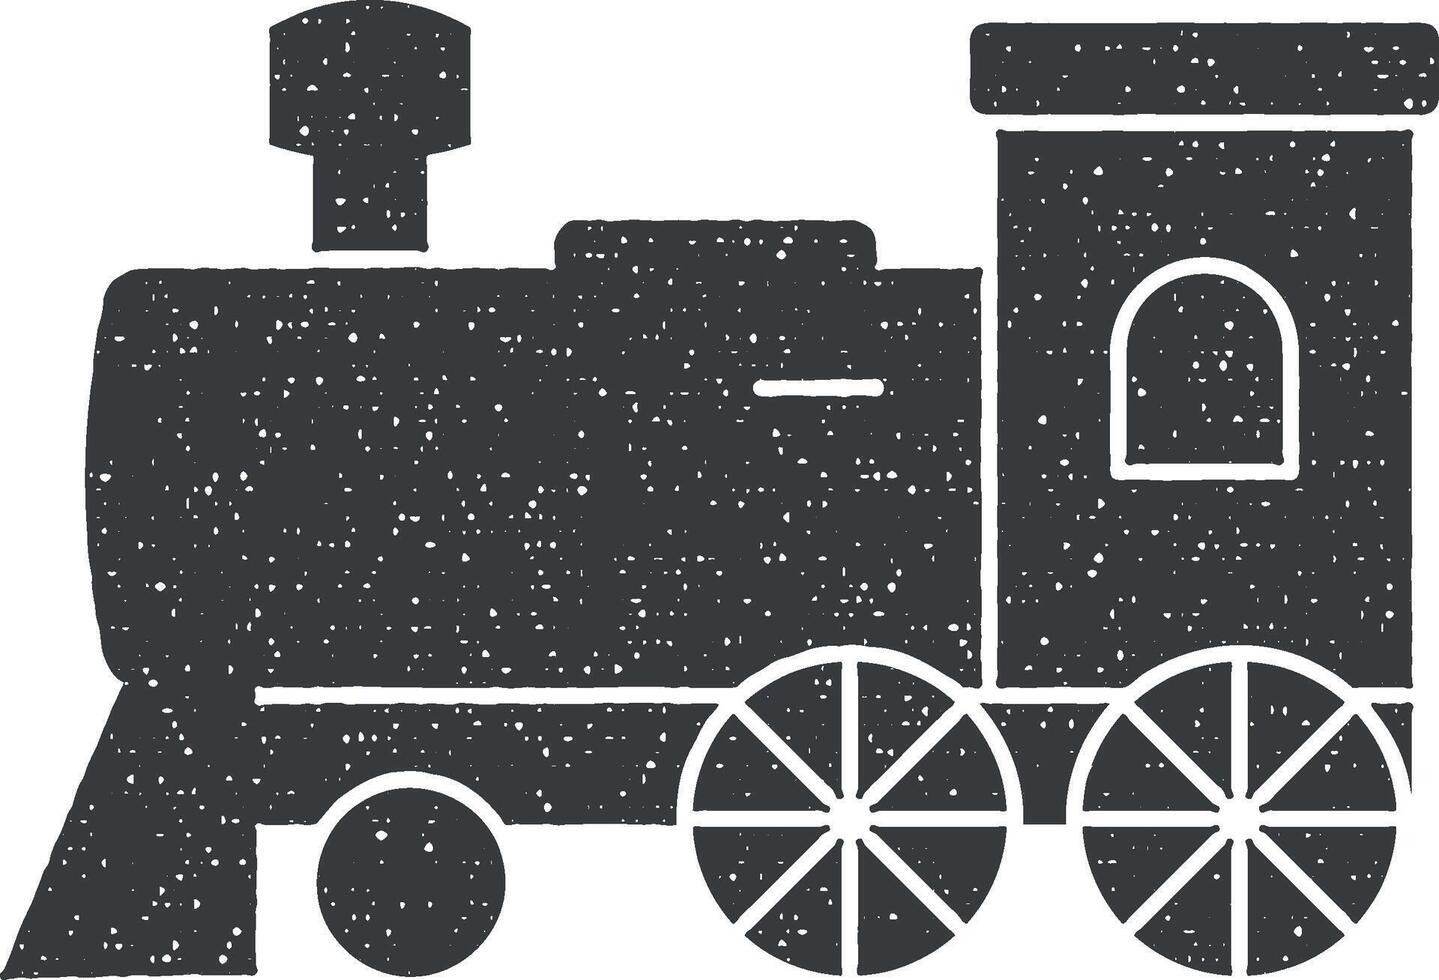 Steam locomotive vector icon illustration with stamp effect